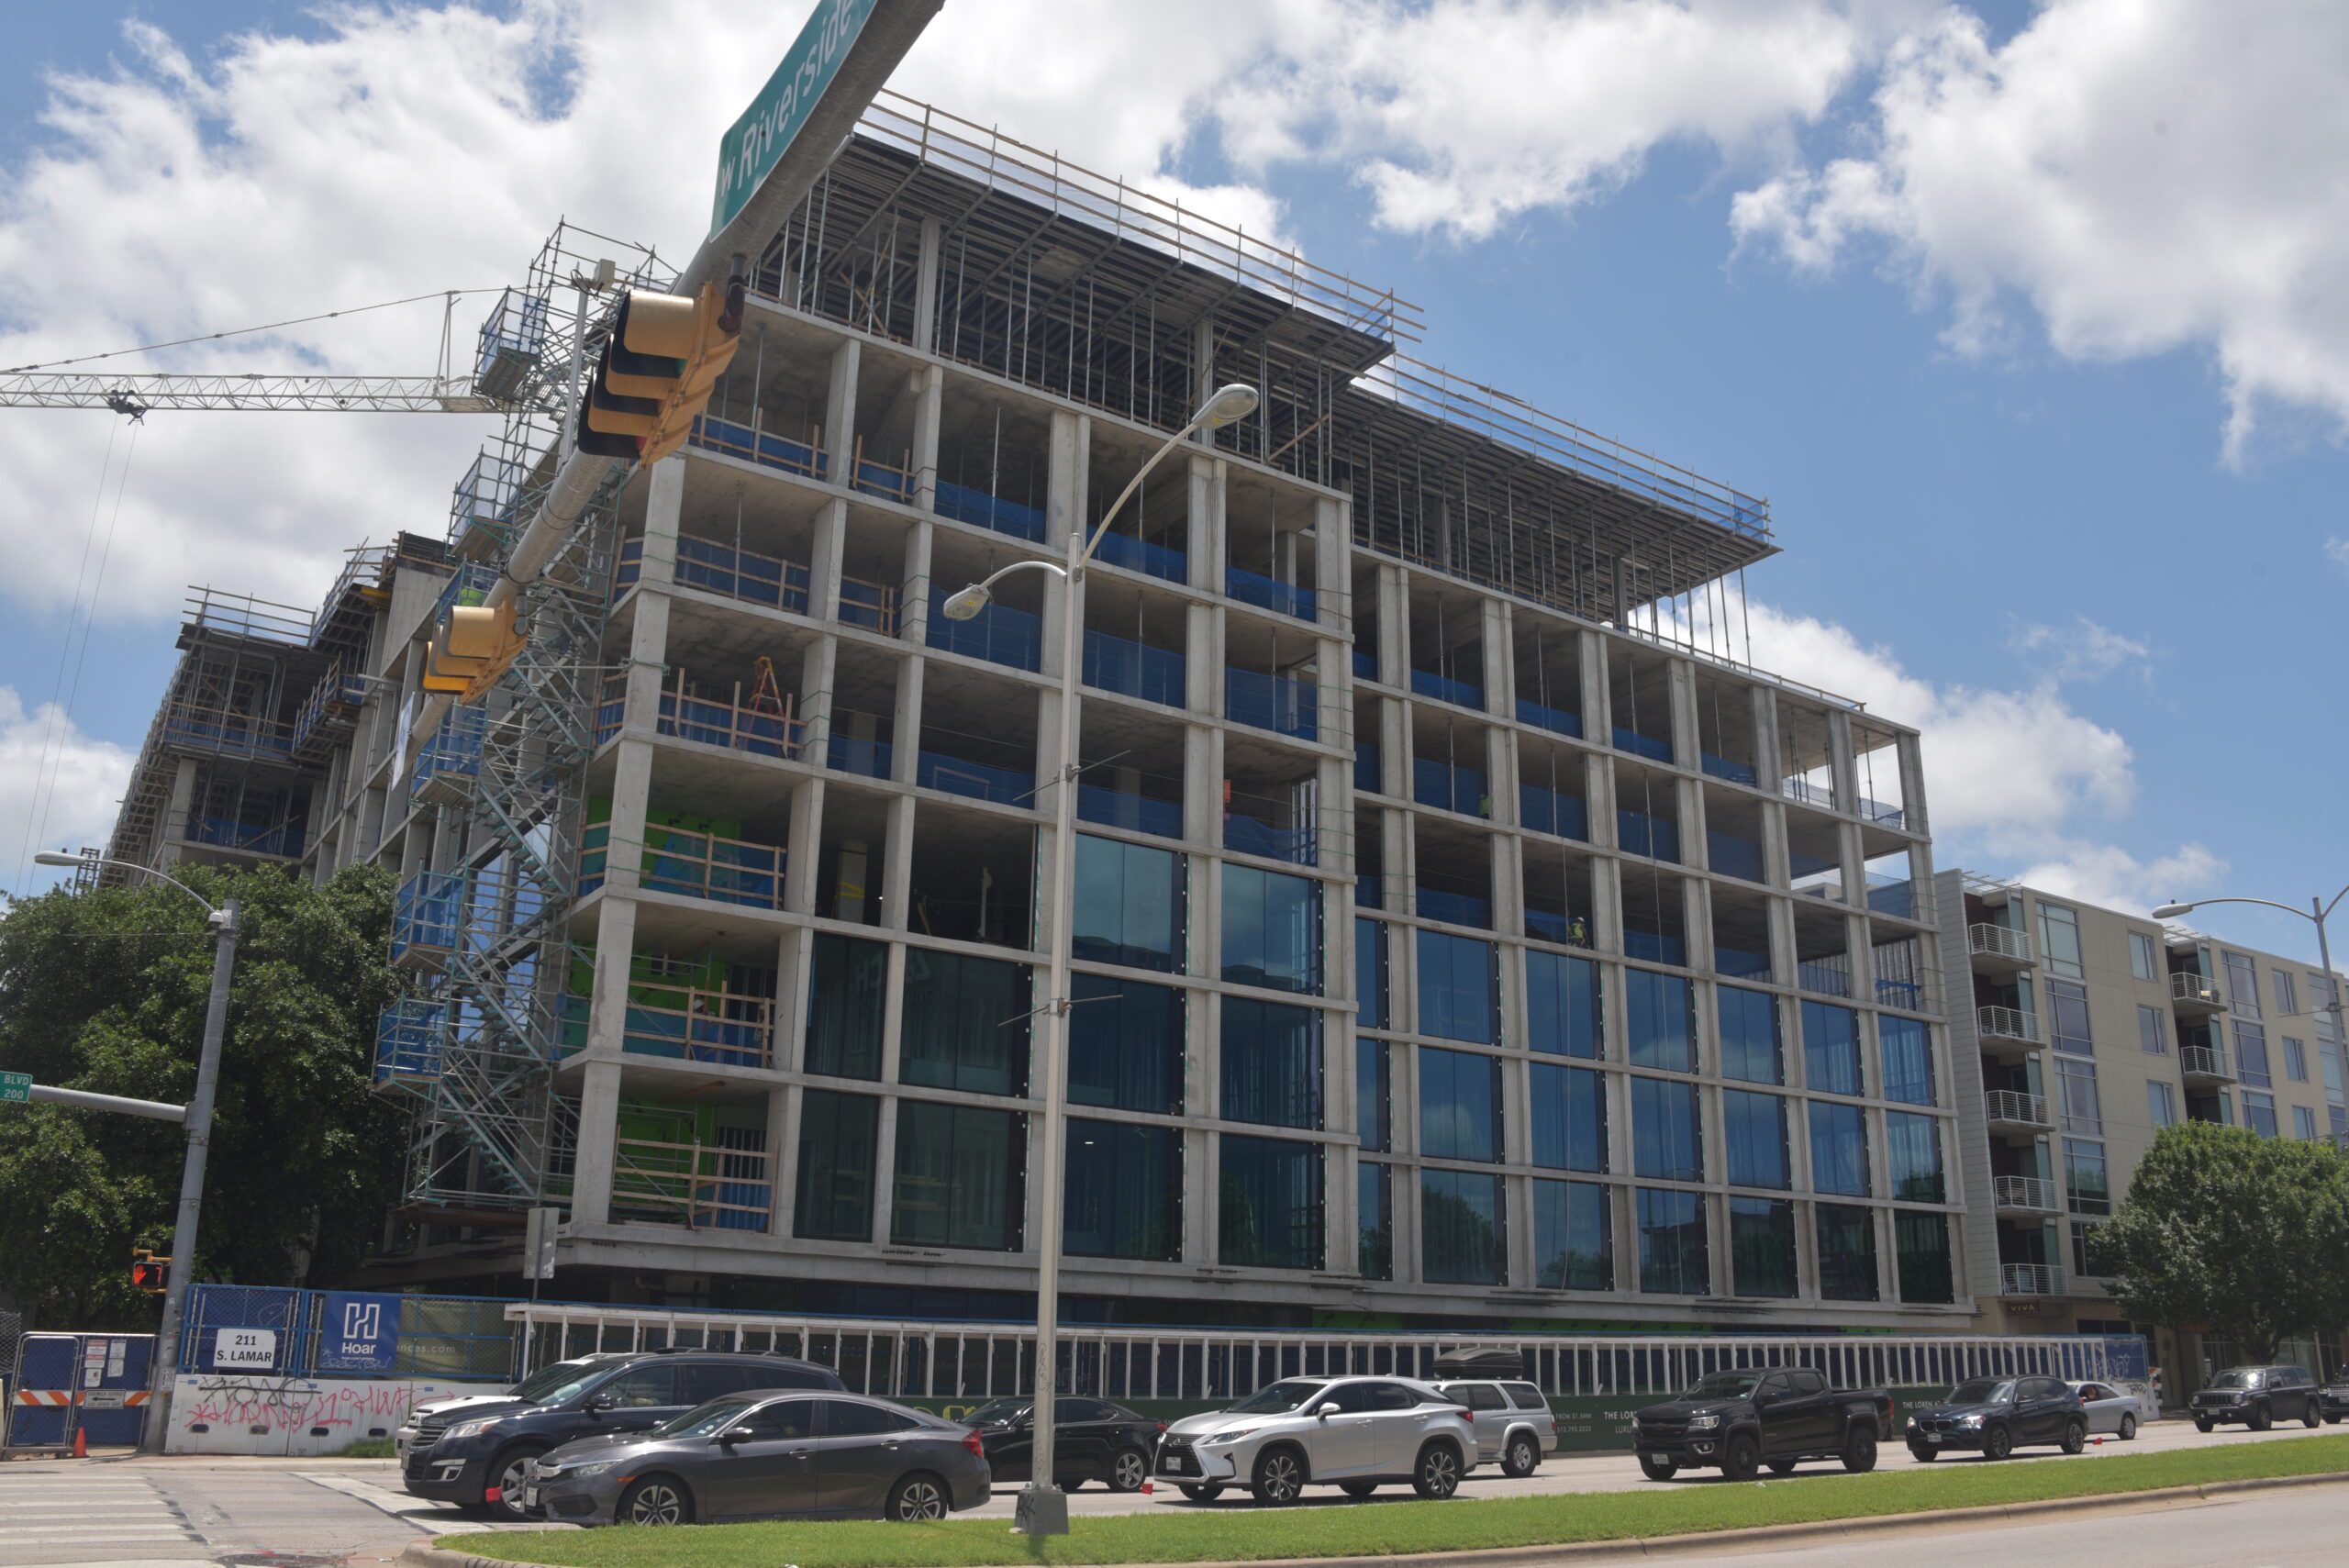 Hoar Construction Announces Topping Out at The Loren